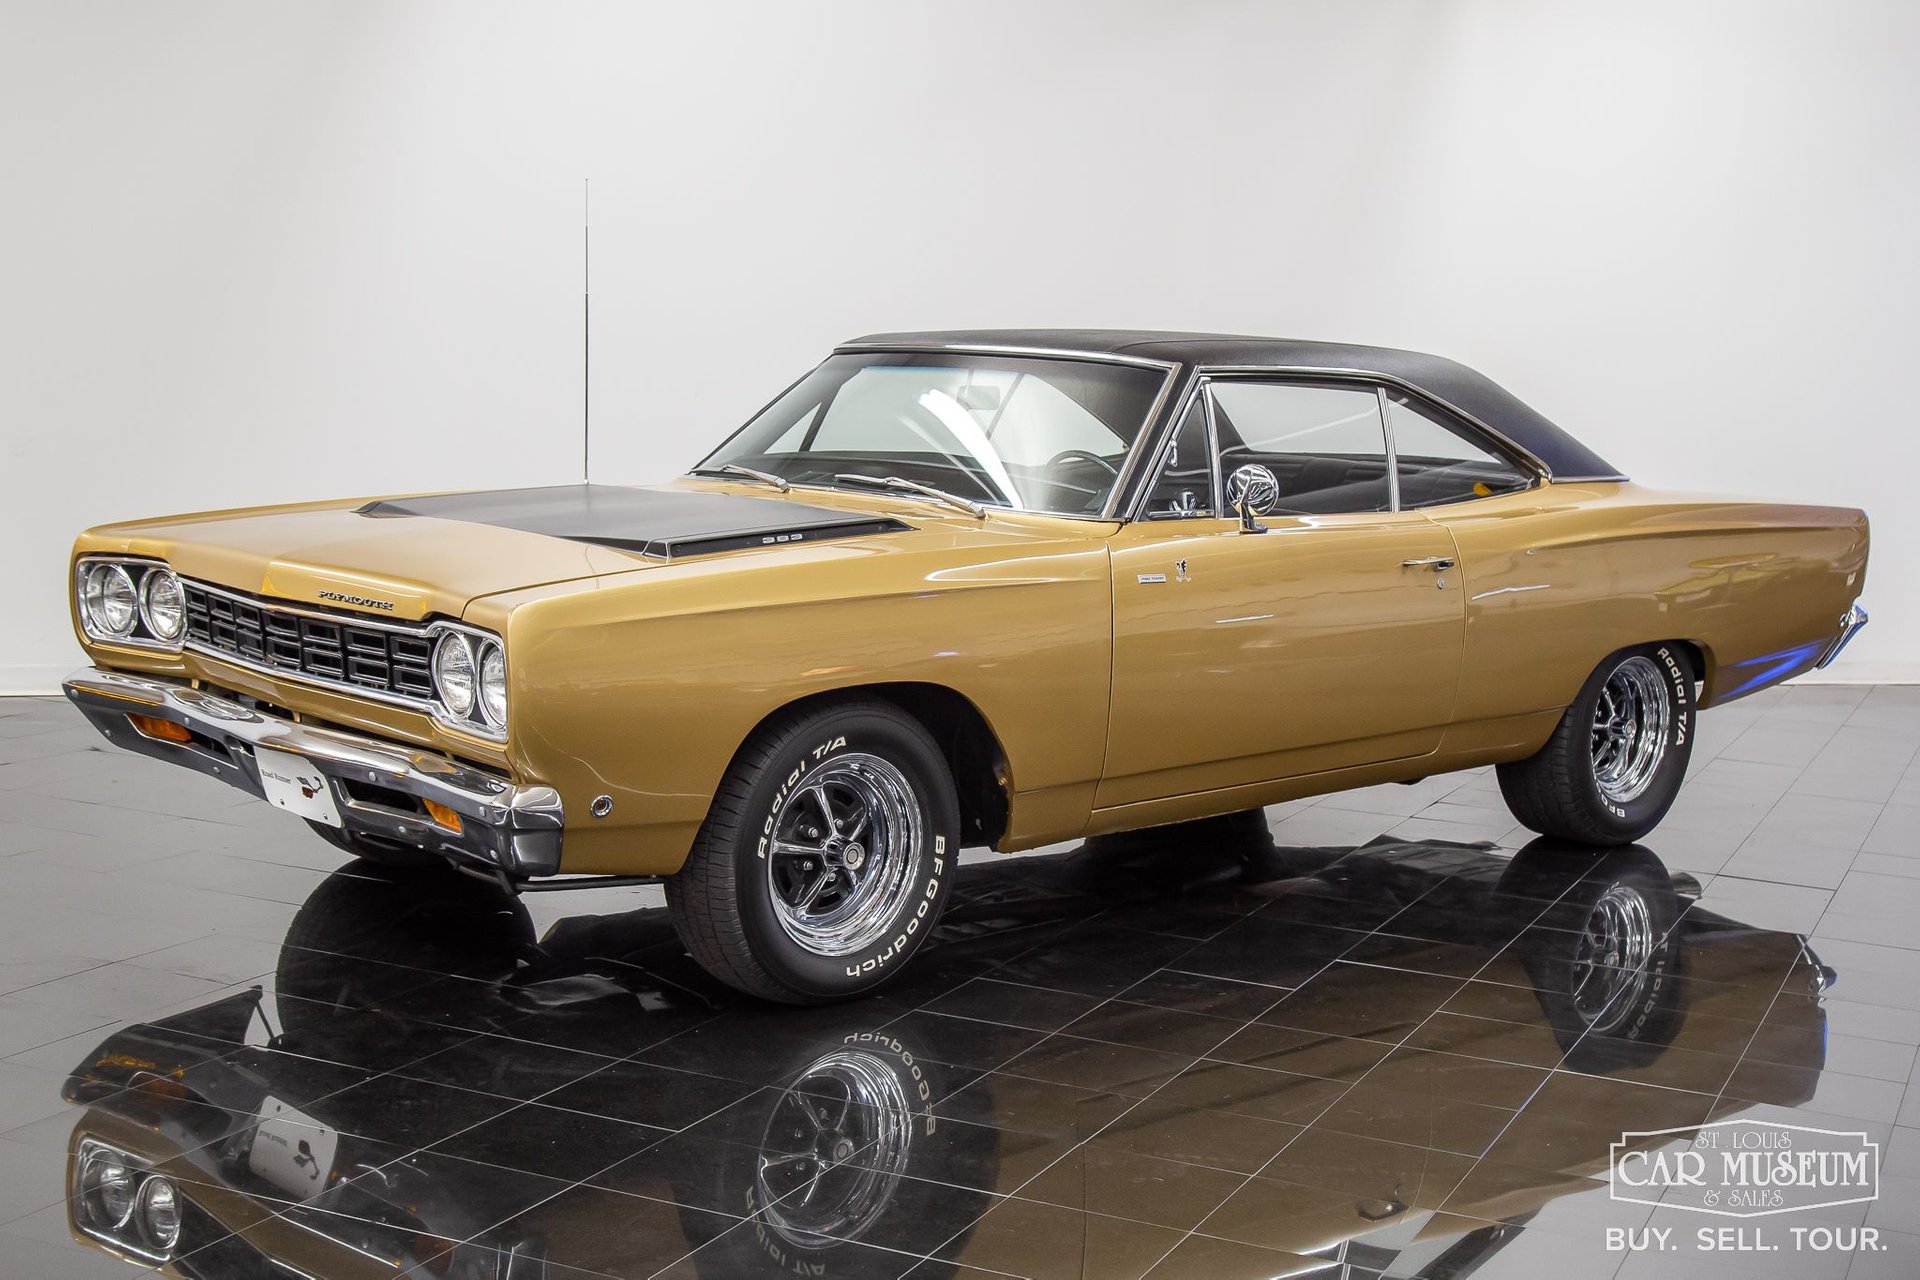 1968 Plymouth Road Runner For Sale | St. Louis Car Museum